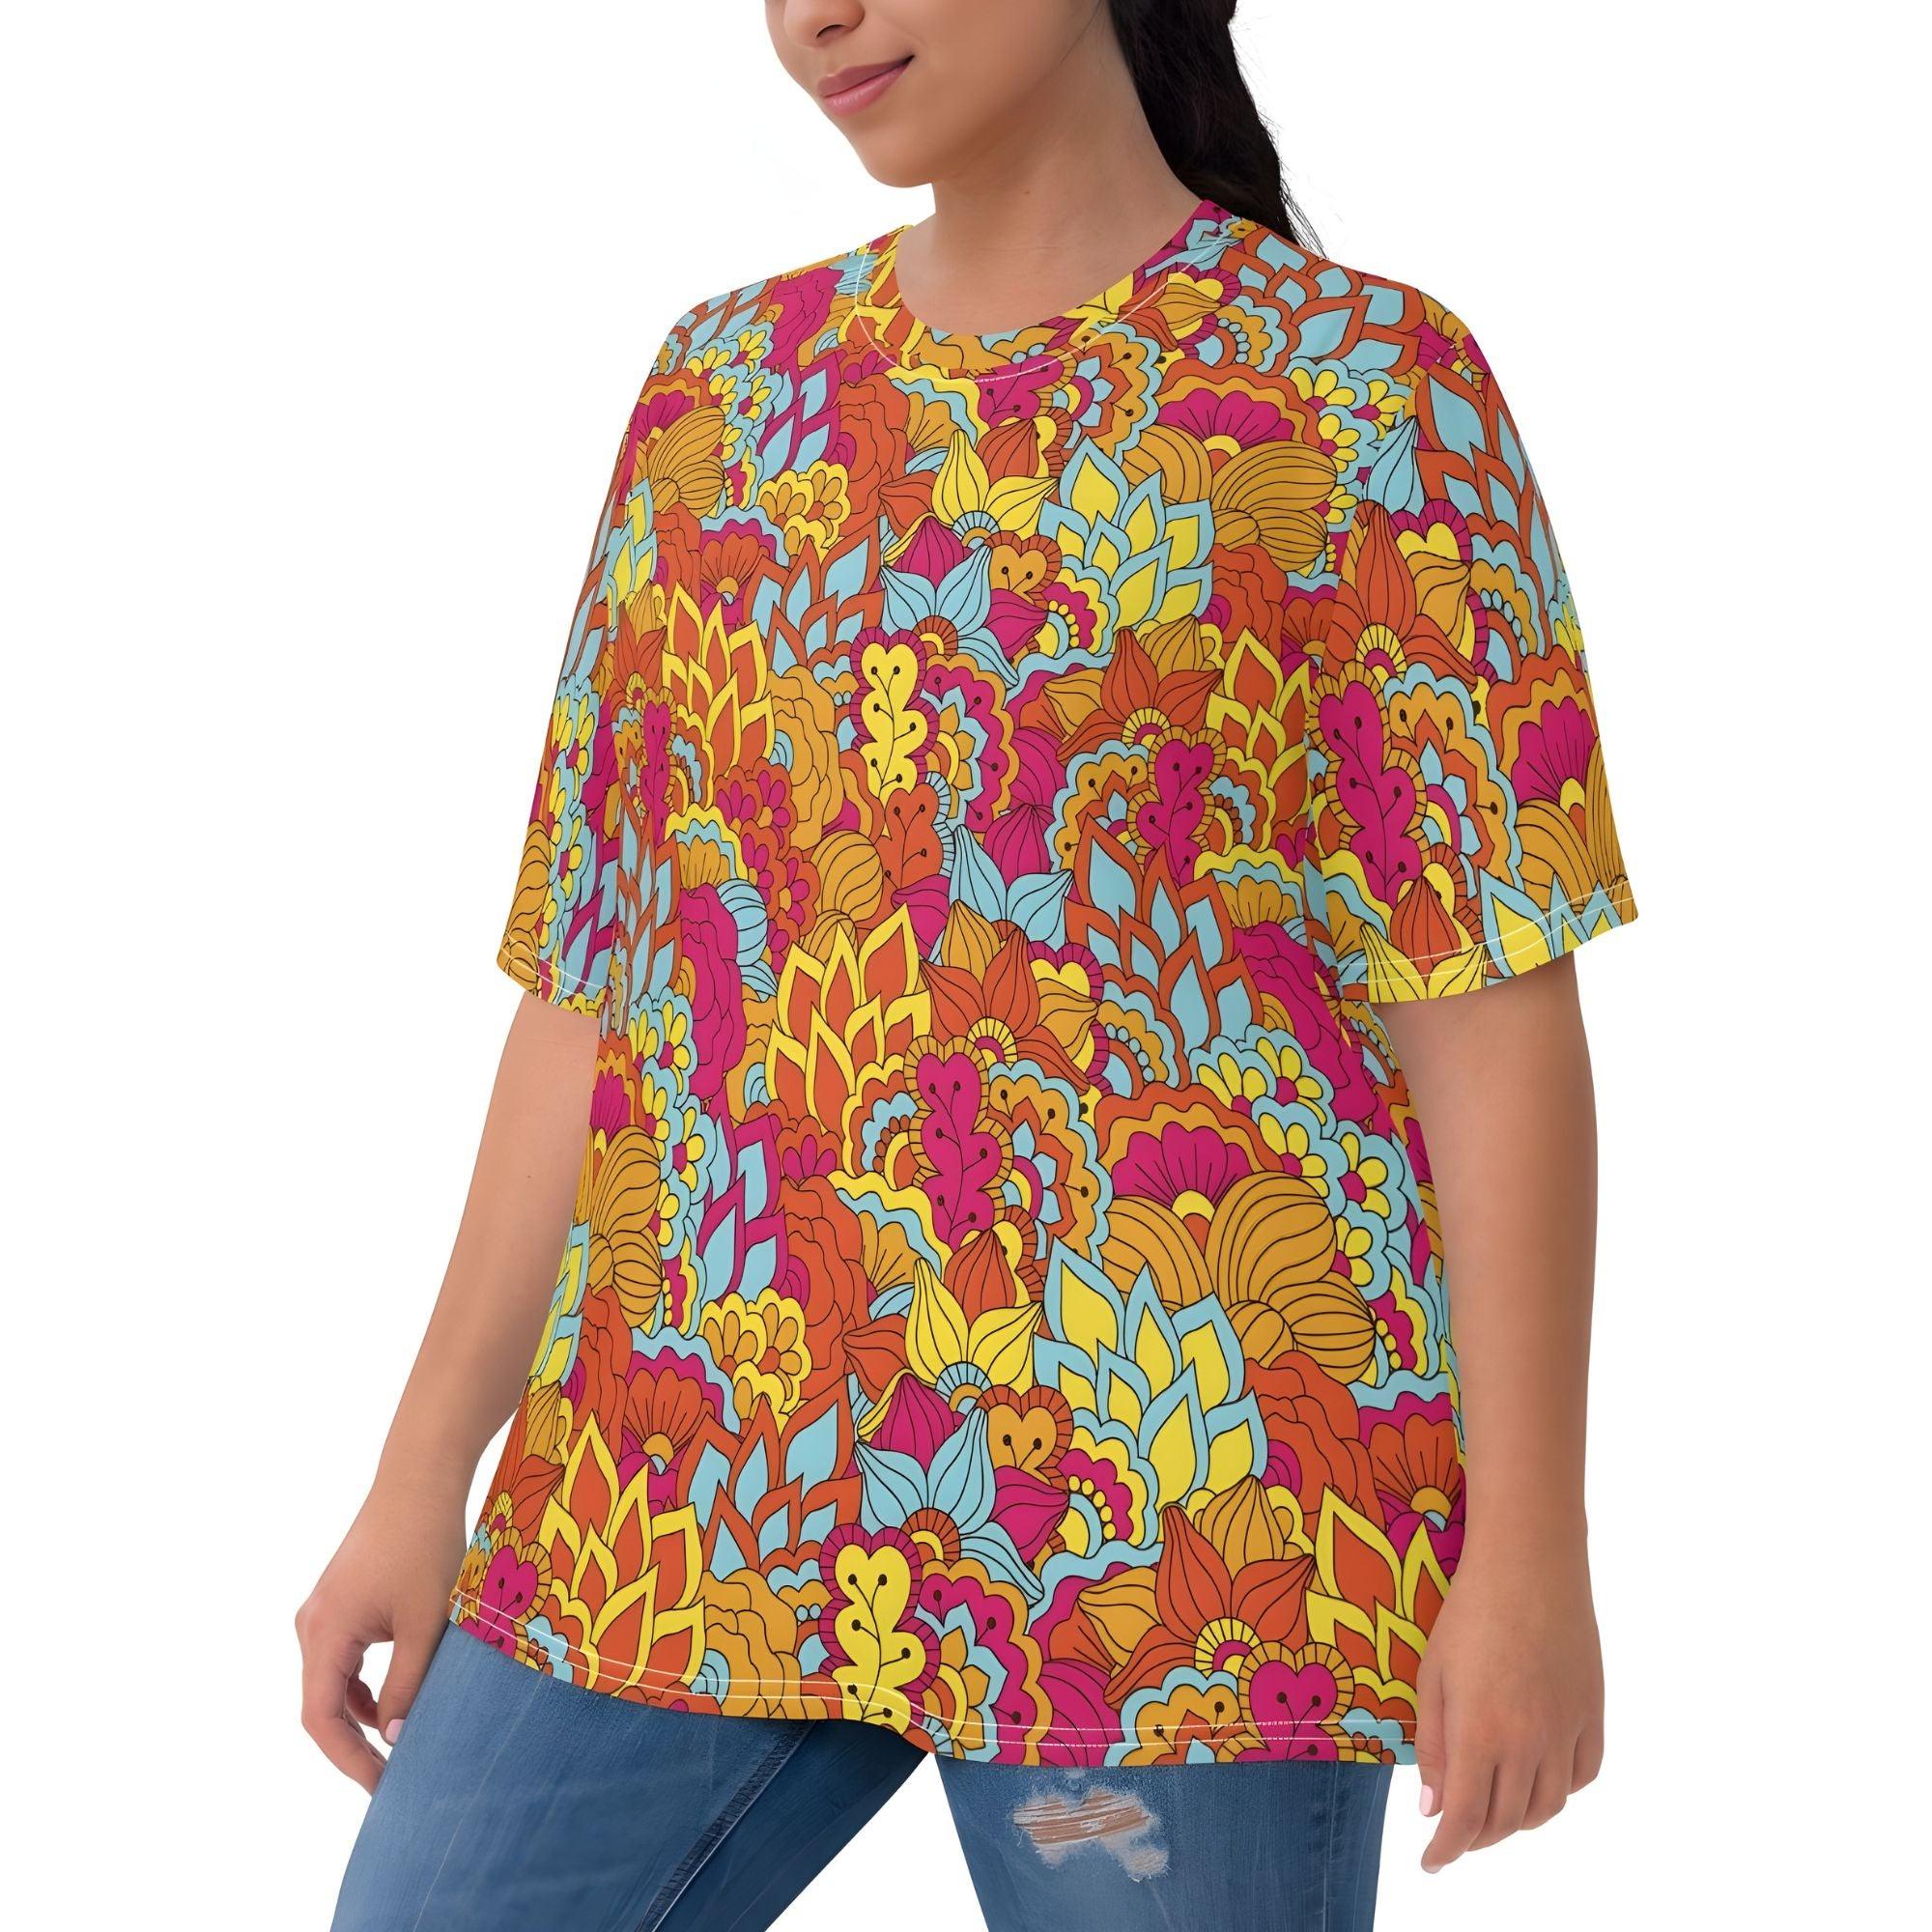 Inela Women's Crew Neck T-shirt - Retro Flower Power Floral  Red Yellow Pink Psychedelic Bold All Over Print Plus Size